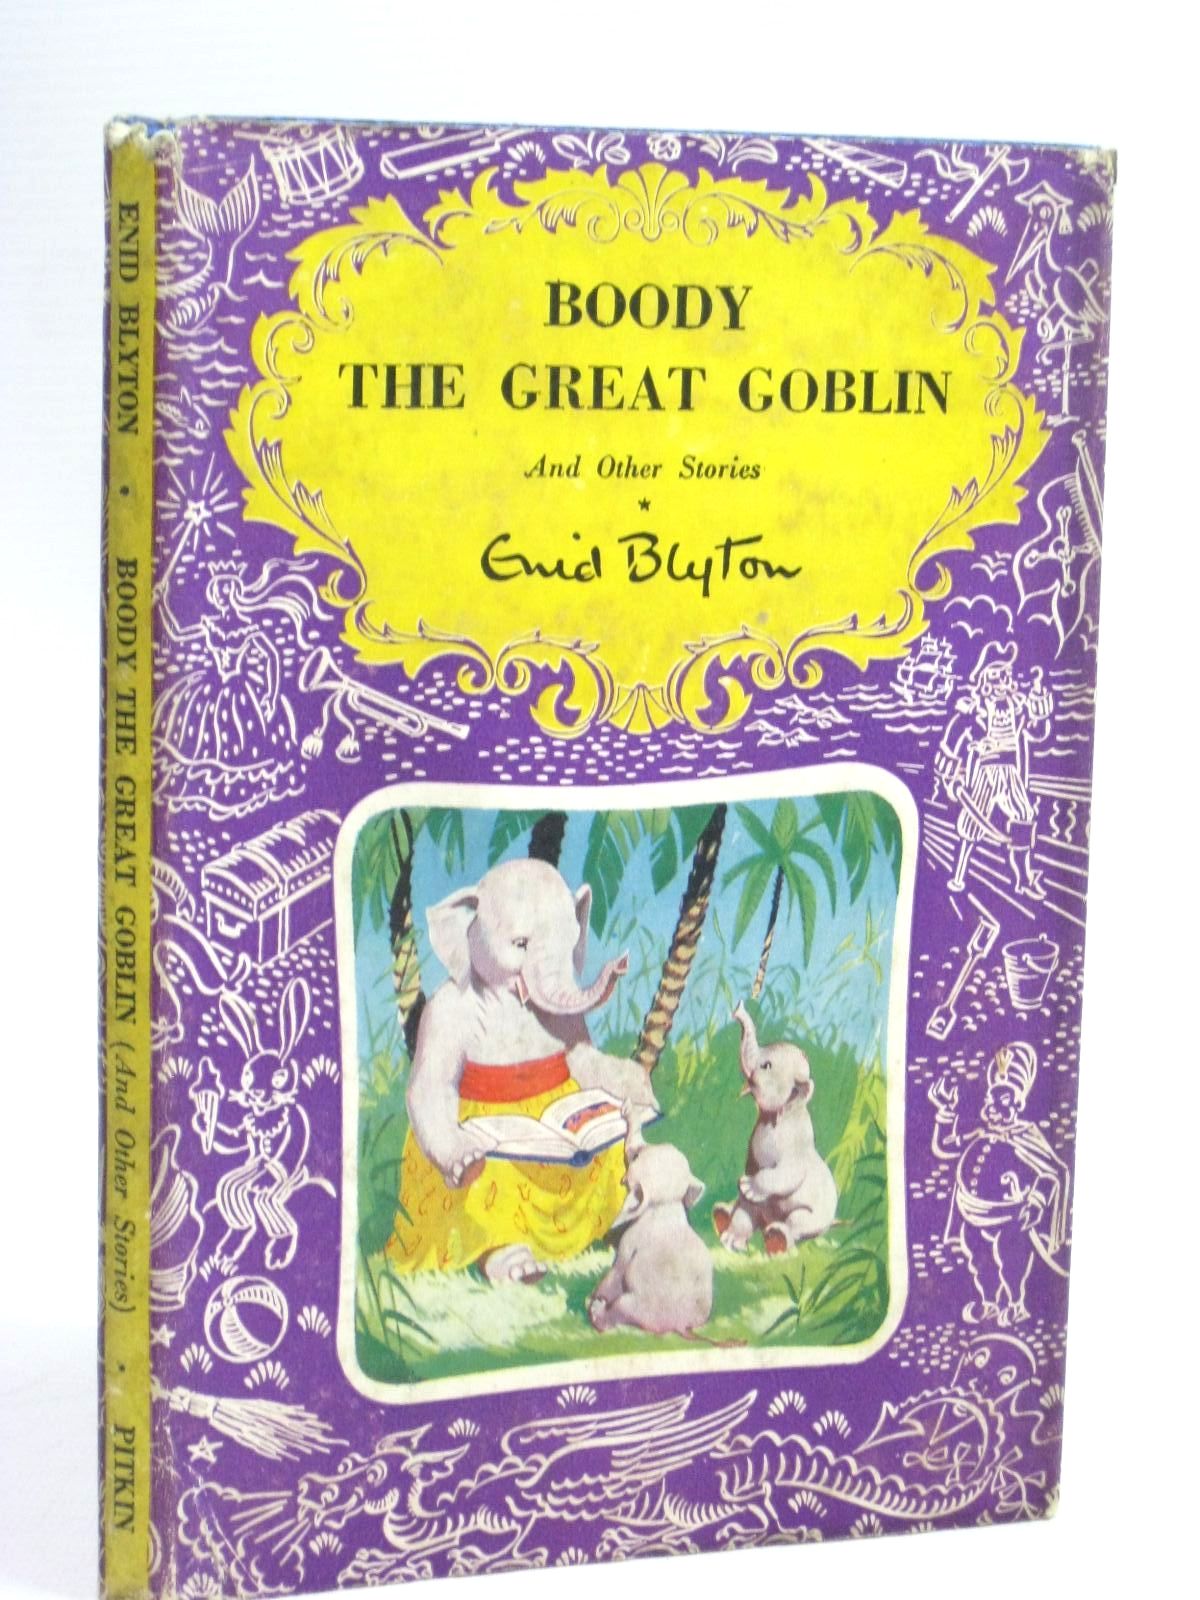 Cover of BOODY THE GREAT GOBLIN AND OTHER STORIES by Enid Blyton